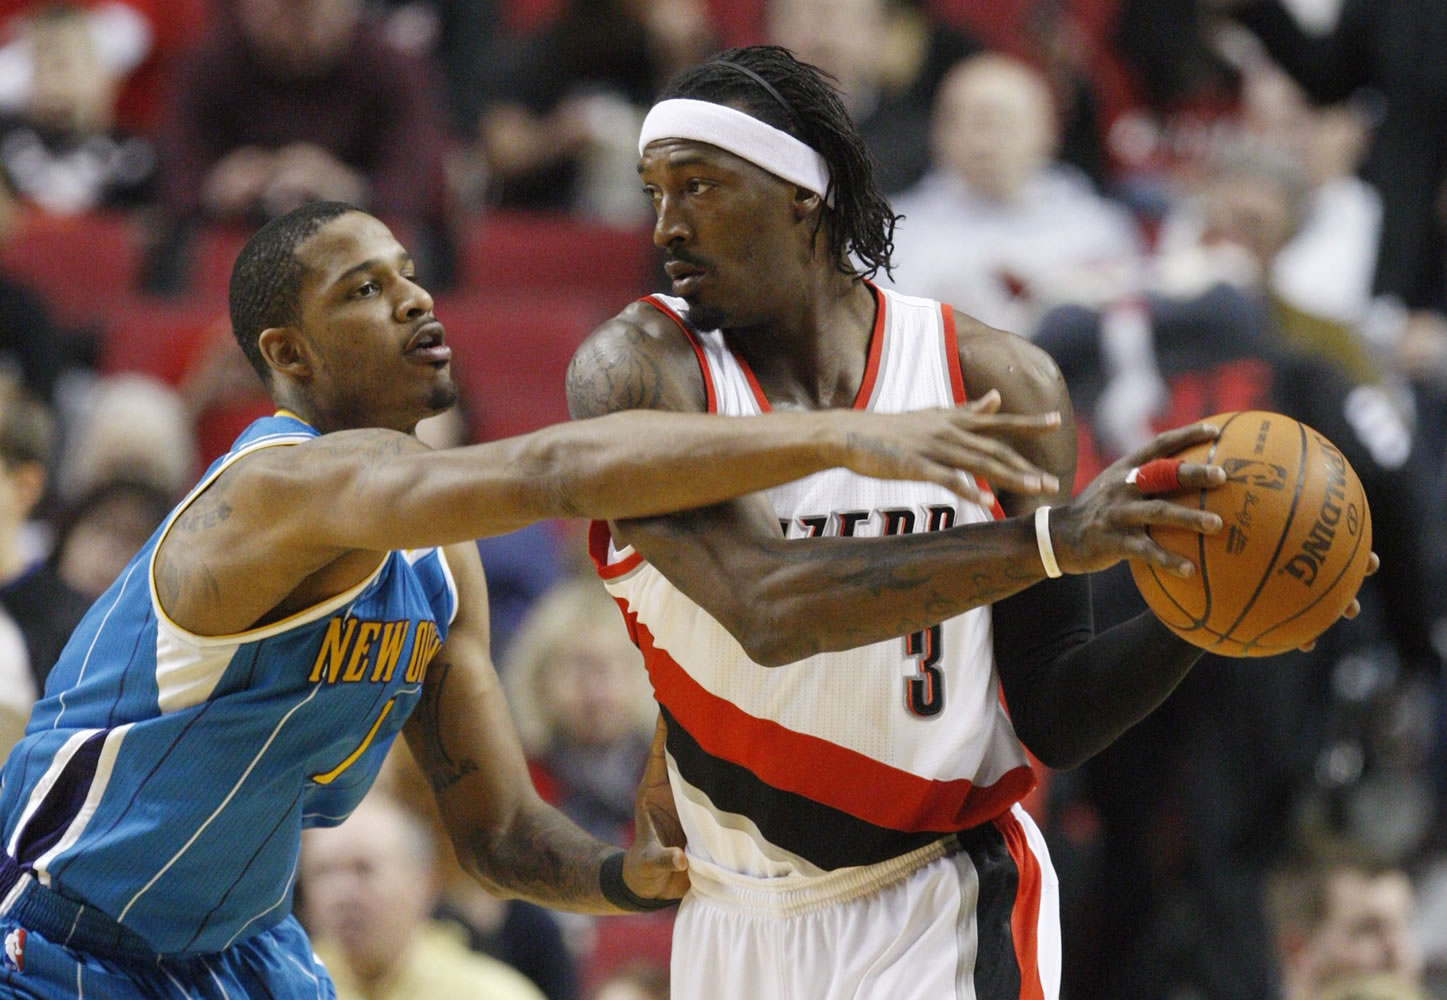 New Orleans Hornets' Trevor Ariza (1) defends against Portland Trail Blazers' Gerald Wallace (3) in the first quarter during an NBA basketball game Monday, March 5, 2012, in Portland, Ore.